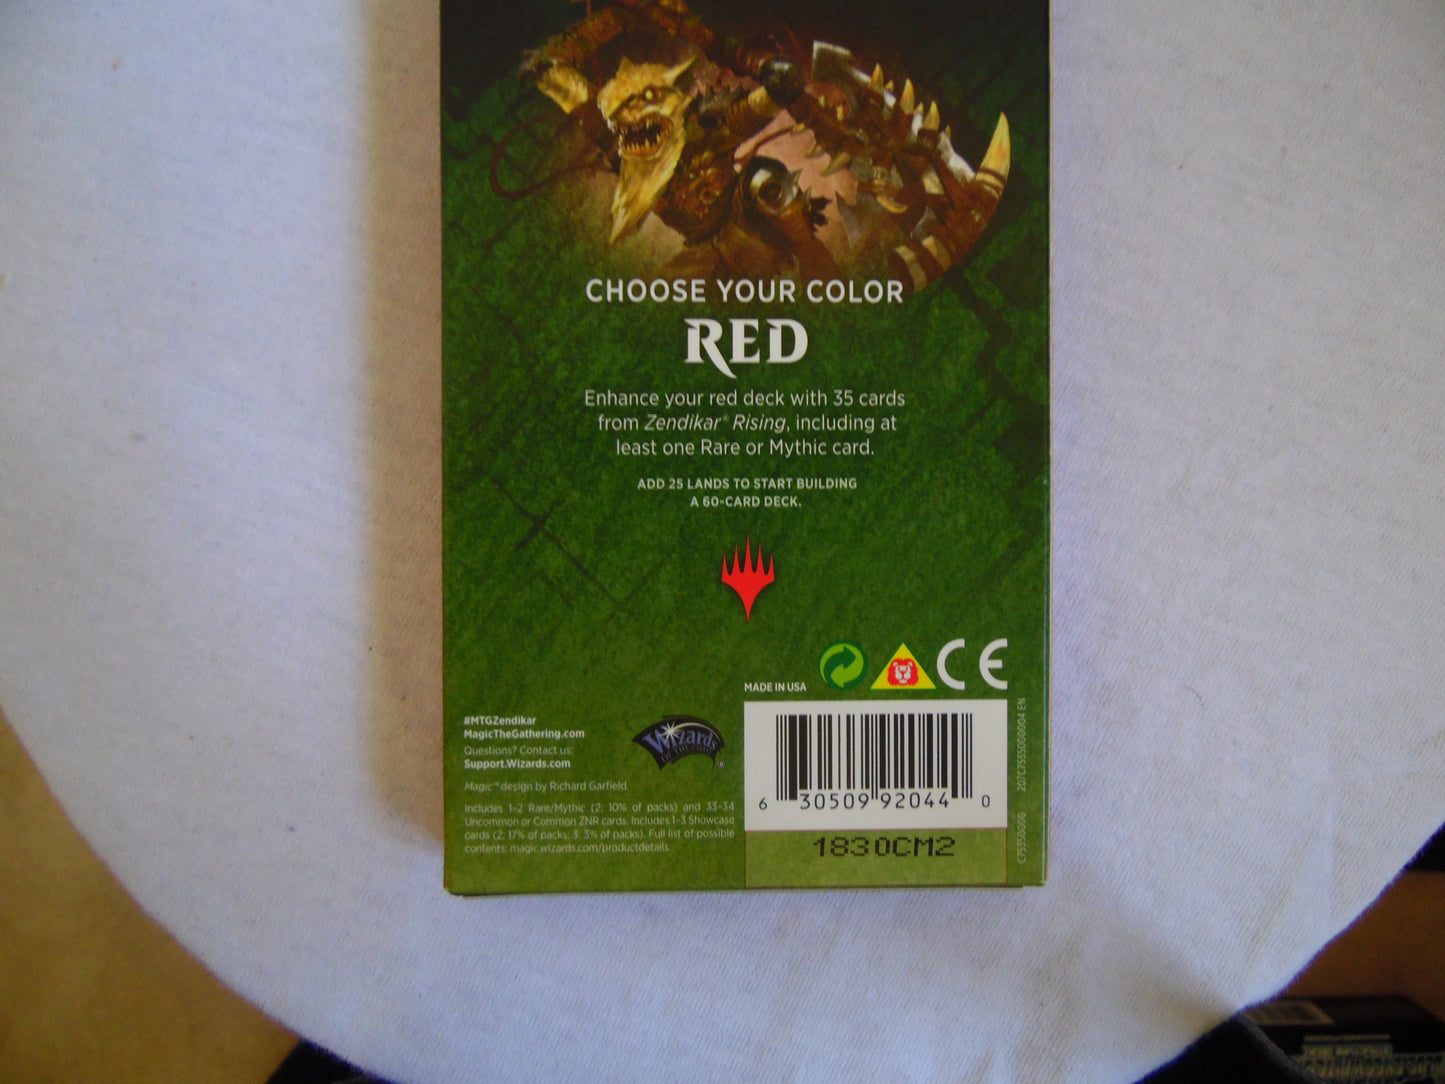 Magic The Gathering Zendikar Rising Red Theme Boosters & Core 2019 Booster Pack